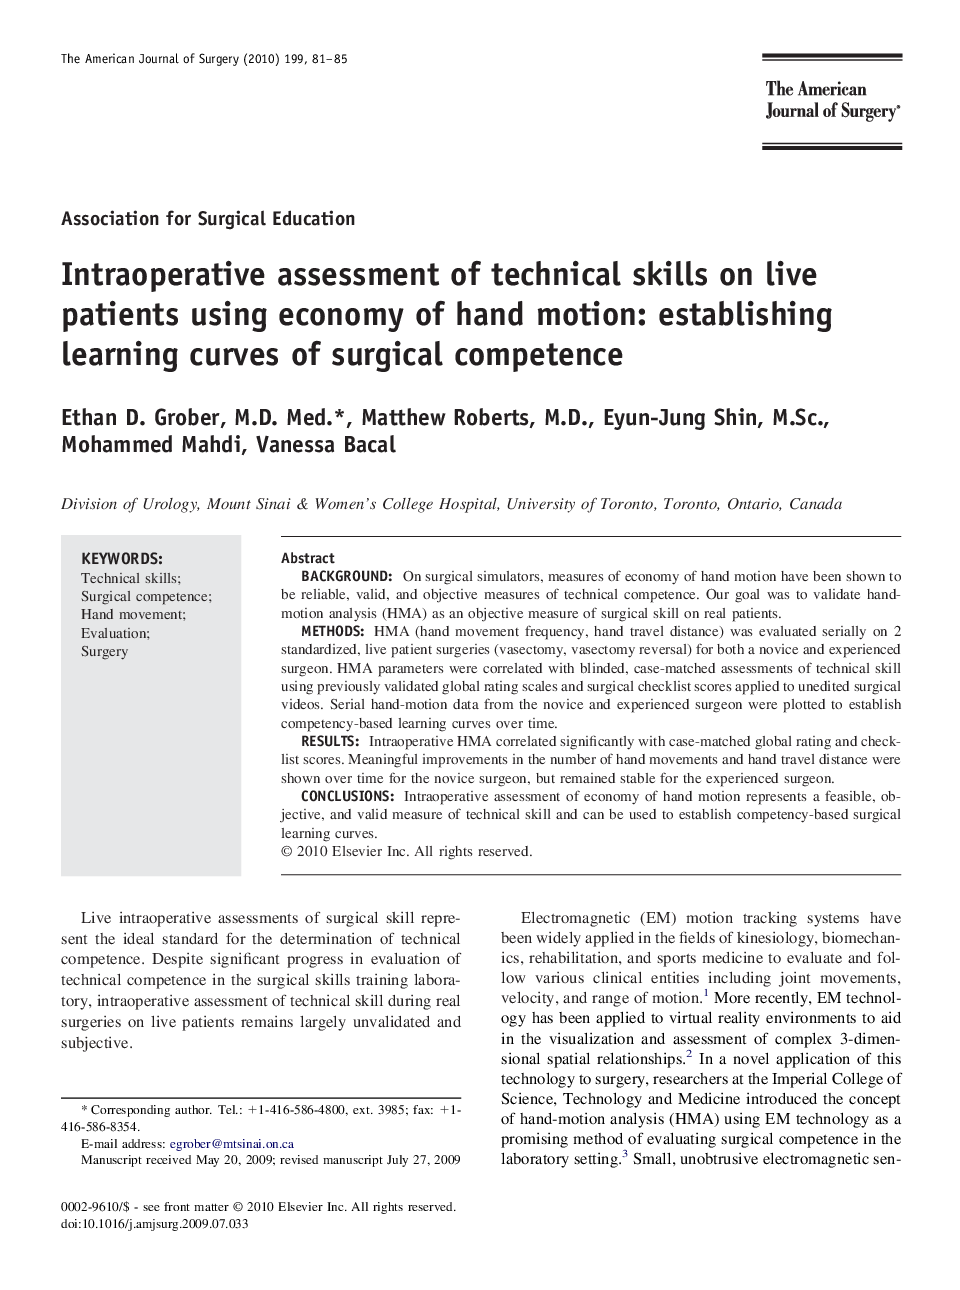 Intraoperative assessment of technical skills on live patients using economy of hand motion: establishing learning curves of surgical competence